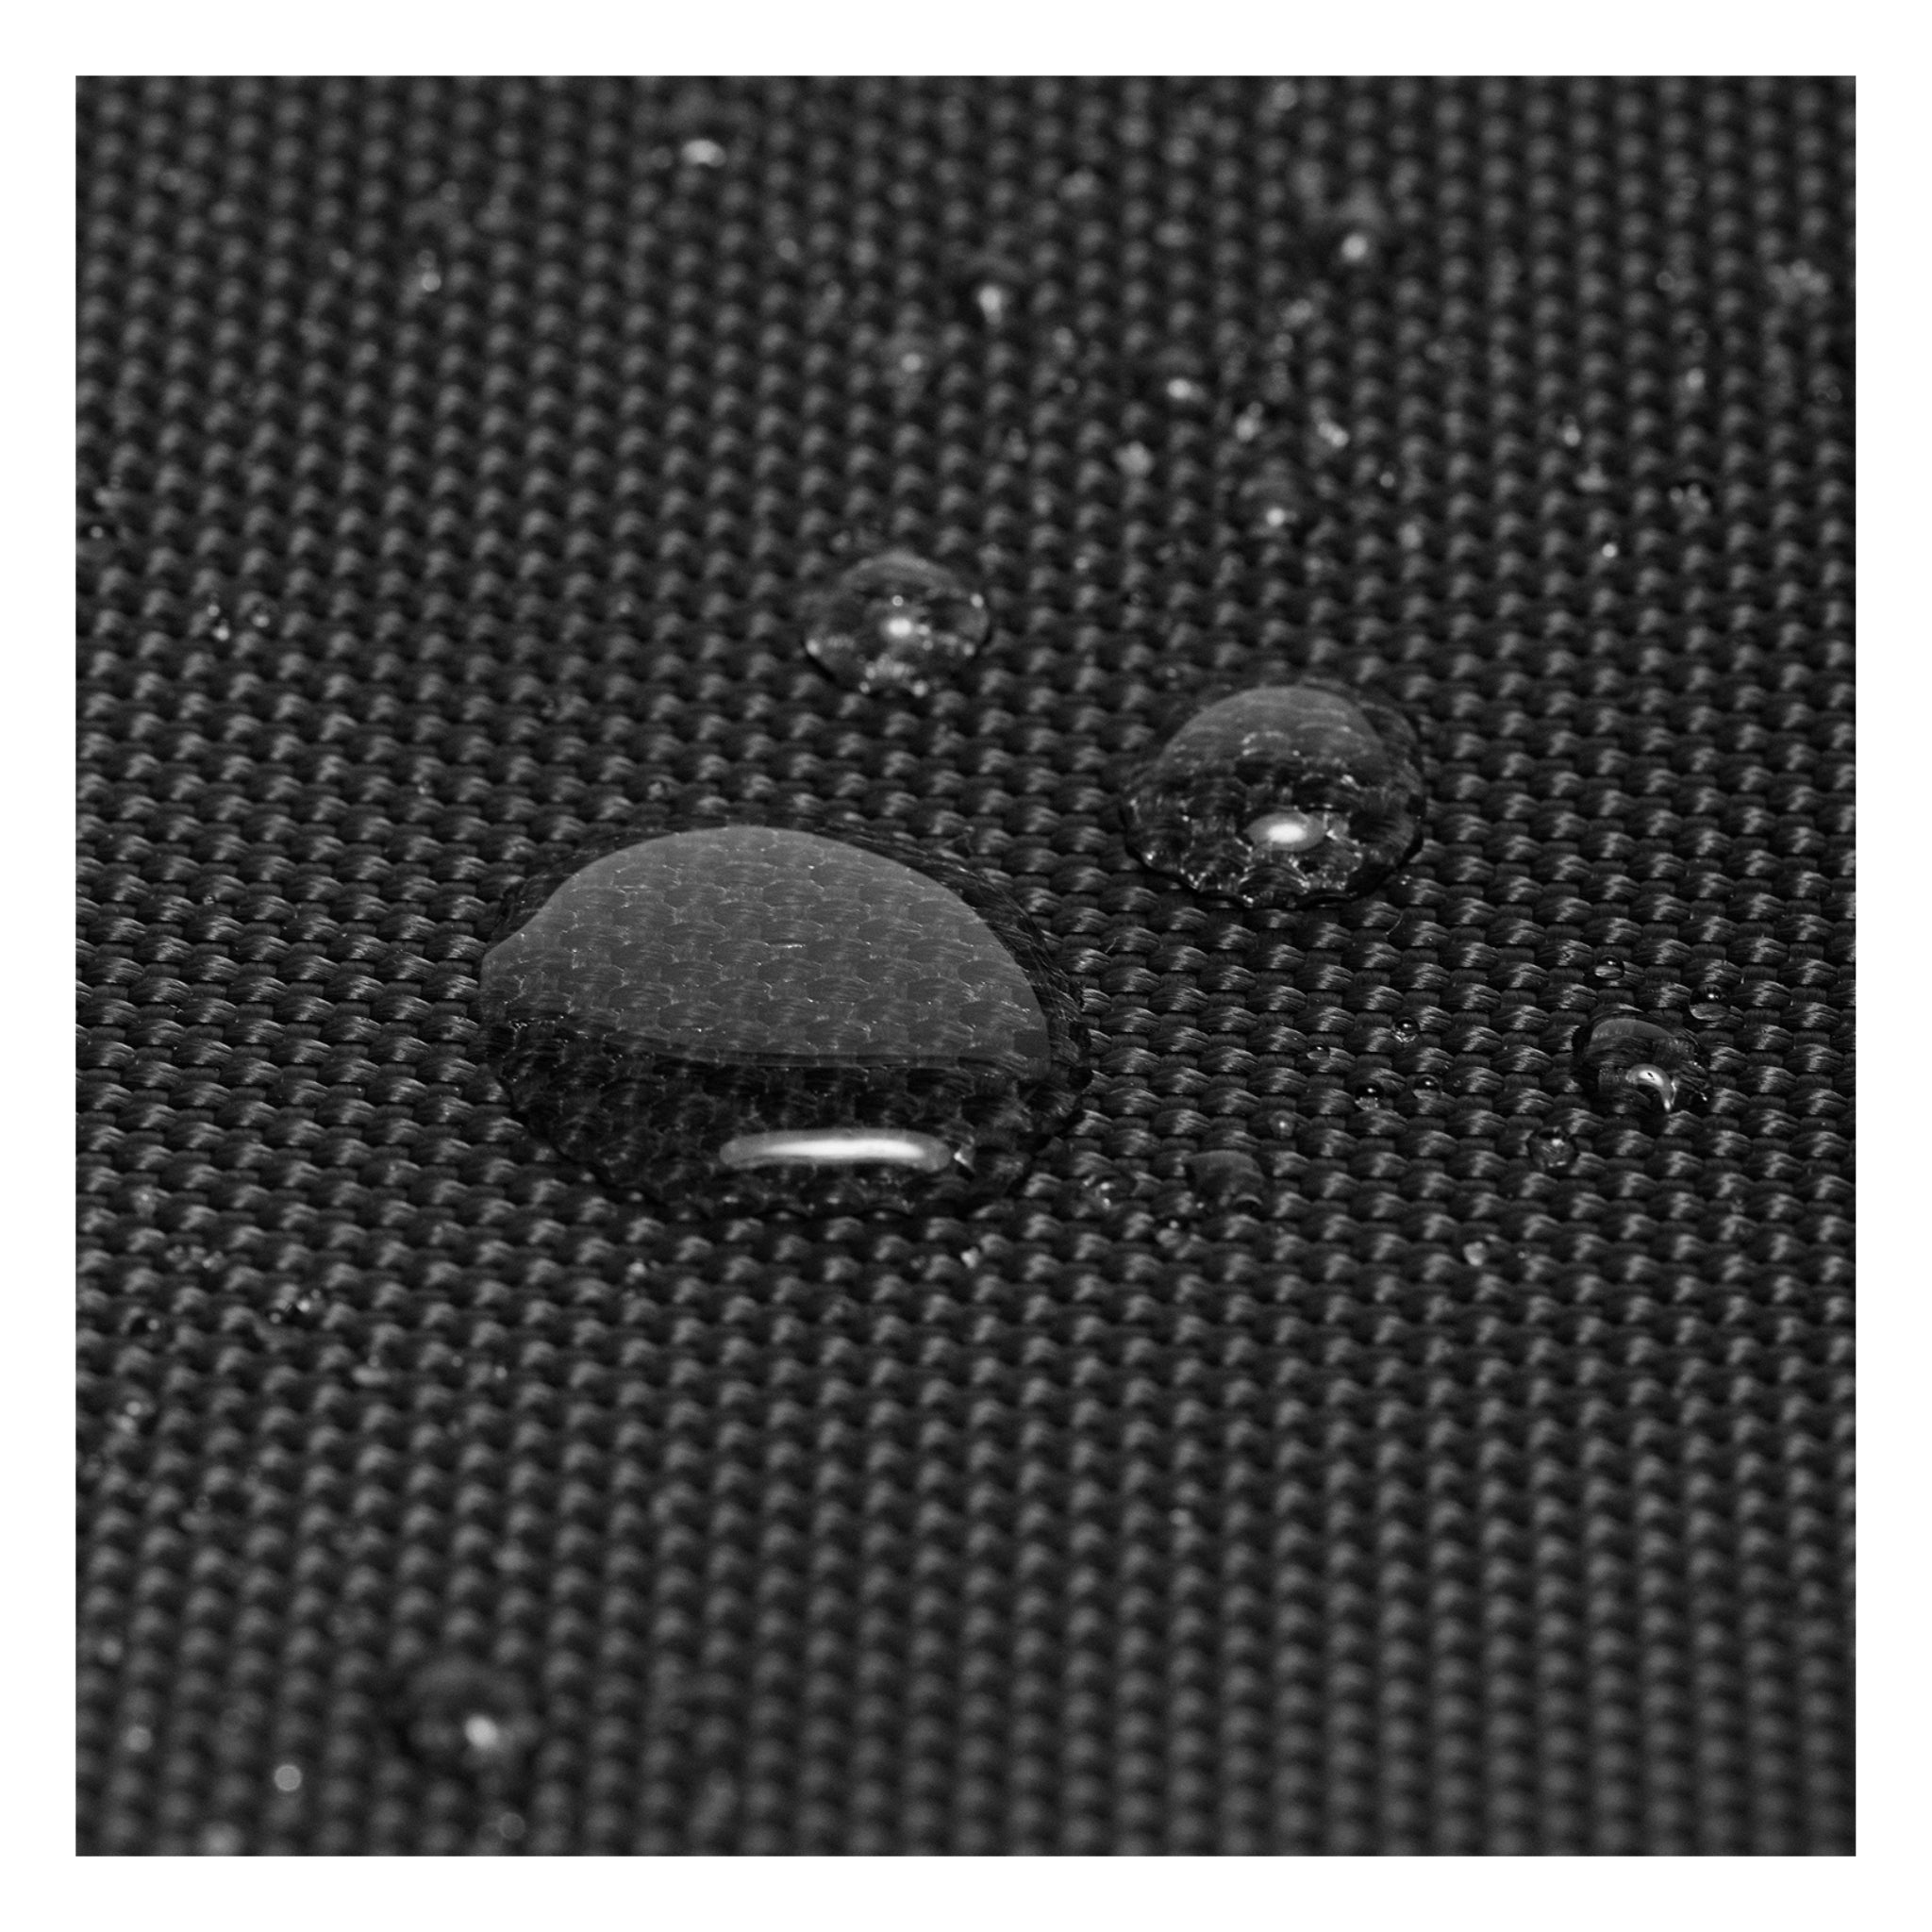 Macro shot of water droplets on the black Weekend Bag's water-resistant fabric, showcasing durability